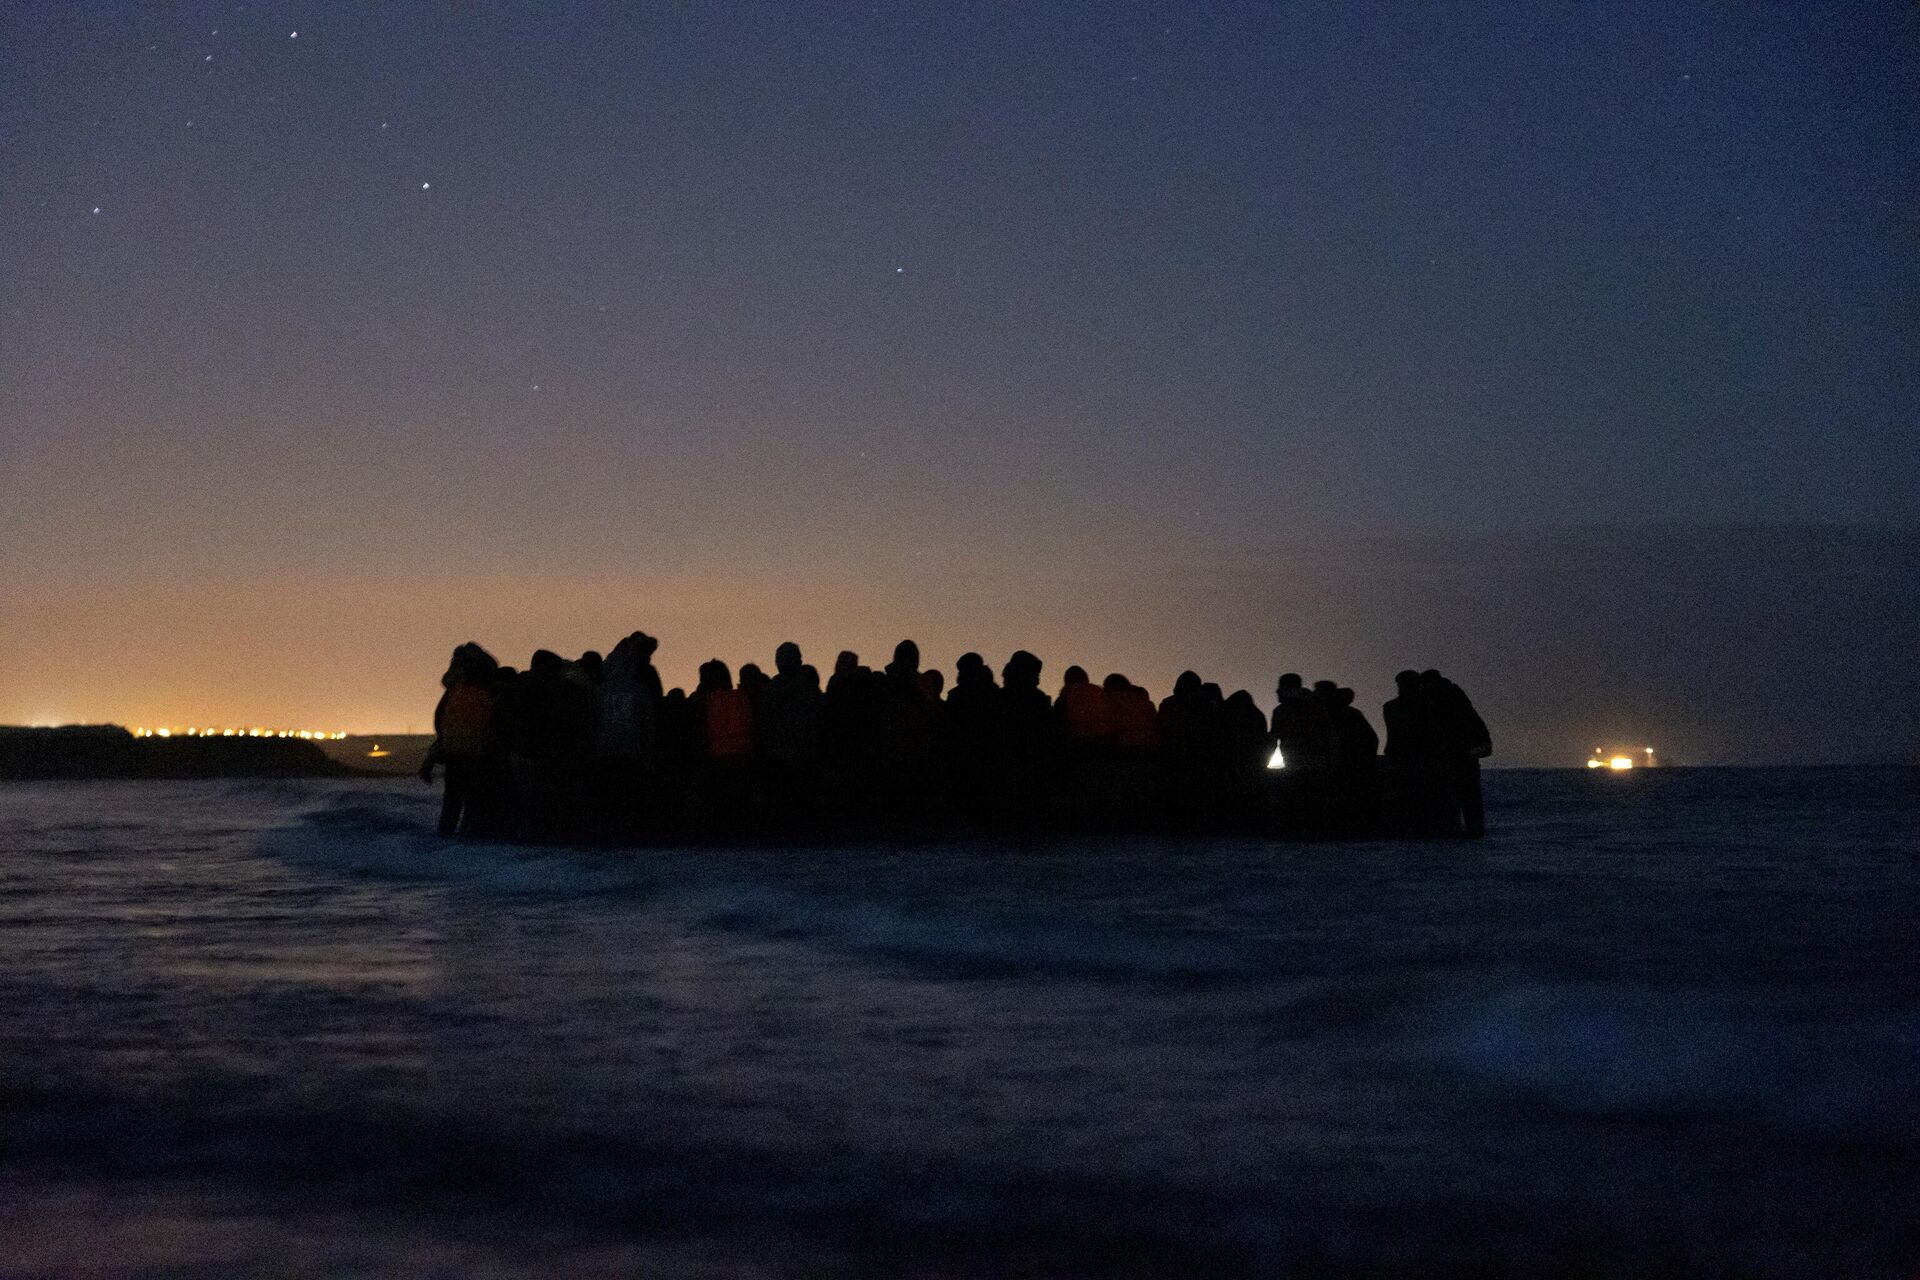 A group of 80 migrants get on one of the inflatable boats to cross the Channel towards England at night, near Wimereux, northern France, on October 16, 2021 - Sputnik International, 1920, 22.11.2021